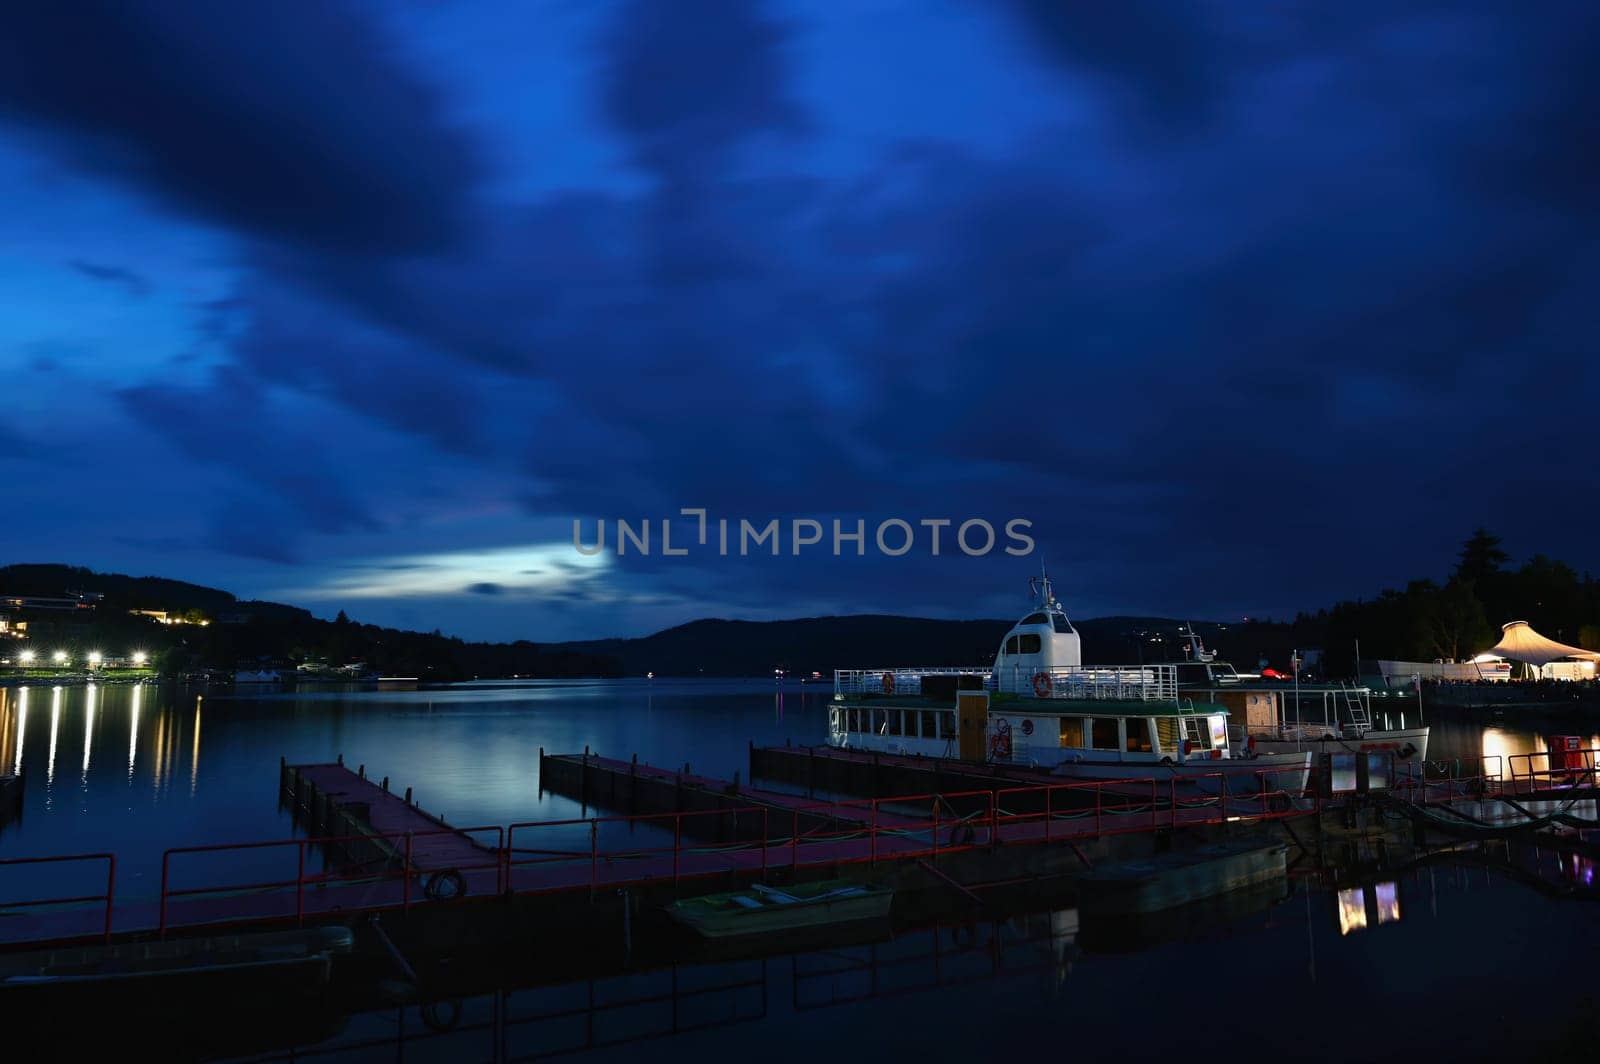 Brno Reservoir - Czech Republic, city of Brno. Evening in the blue hour. Ship in port.